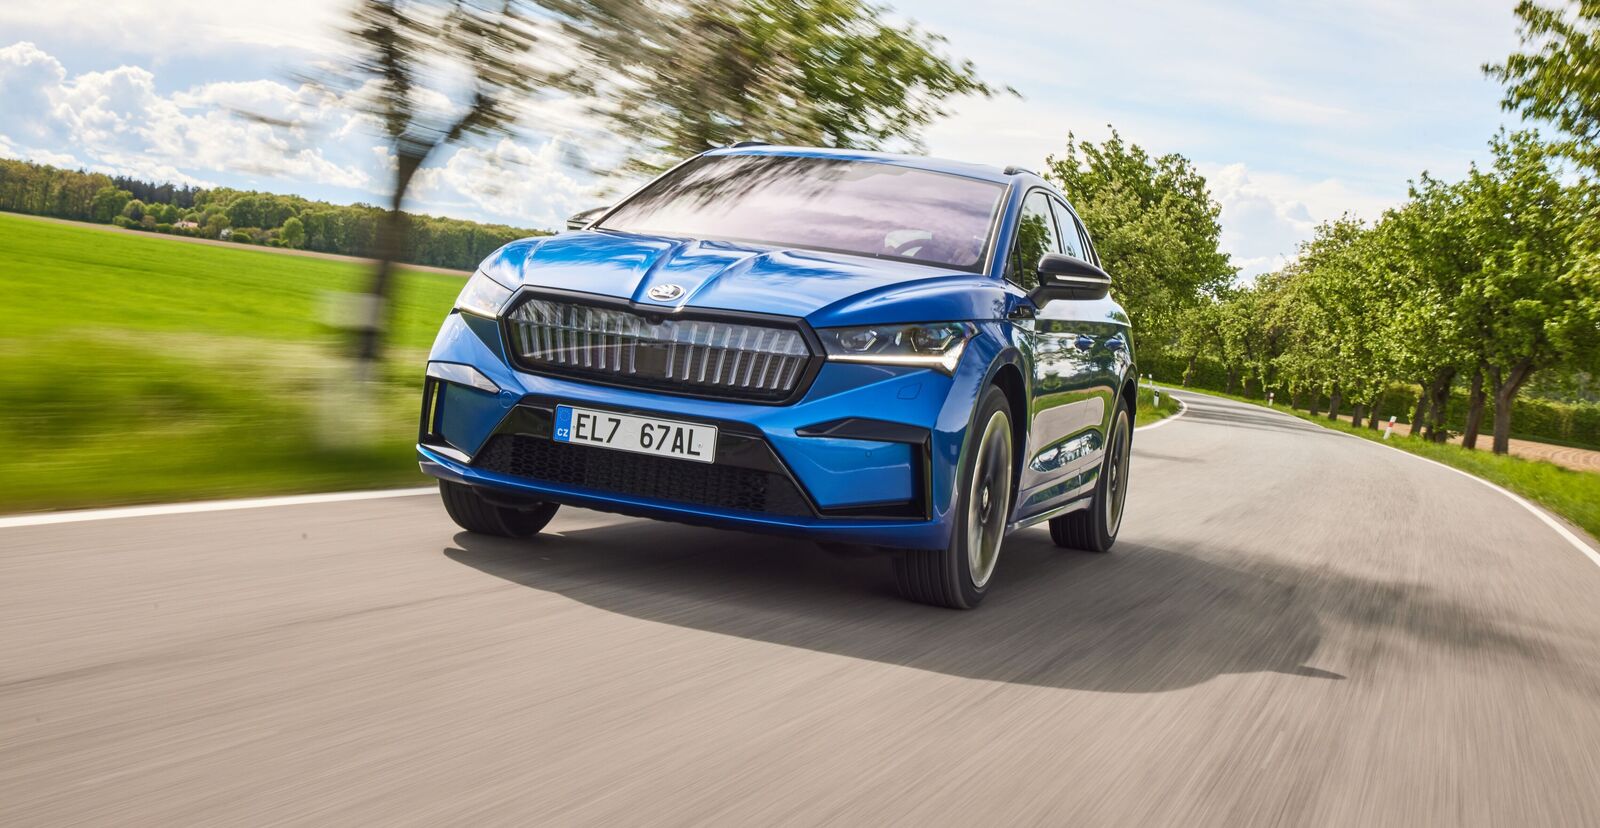 Skoda Enyaq Coupe iV is here bringing an RS version for the first